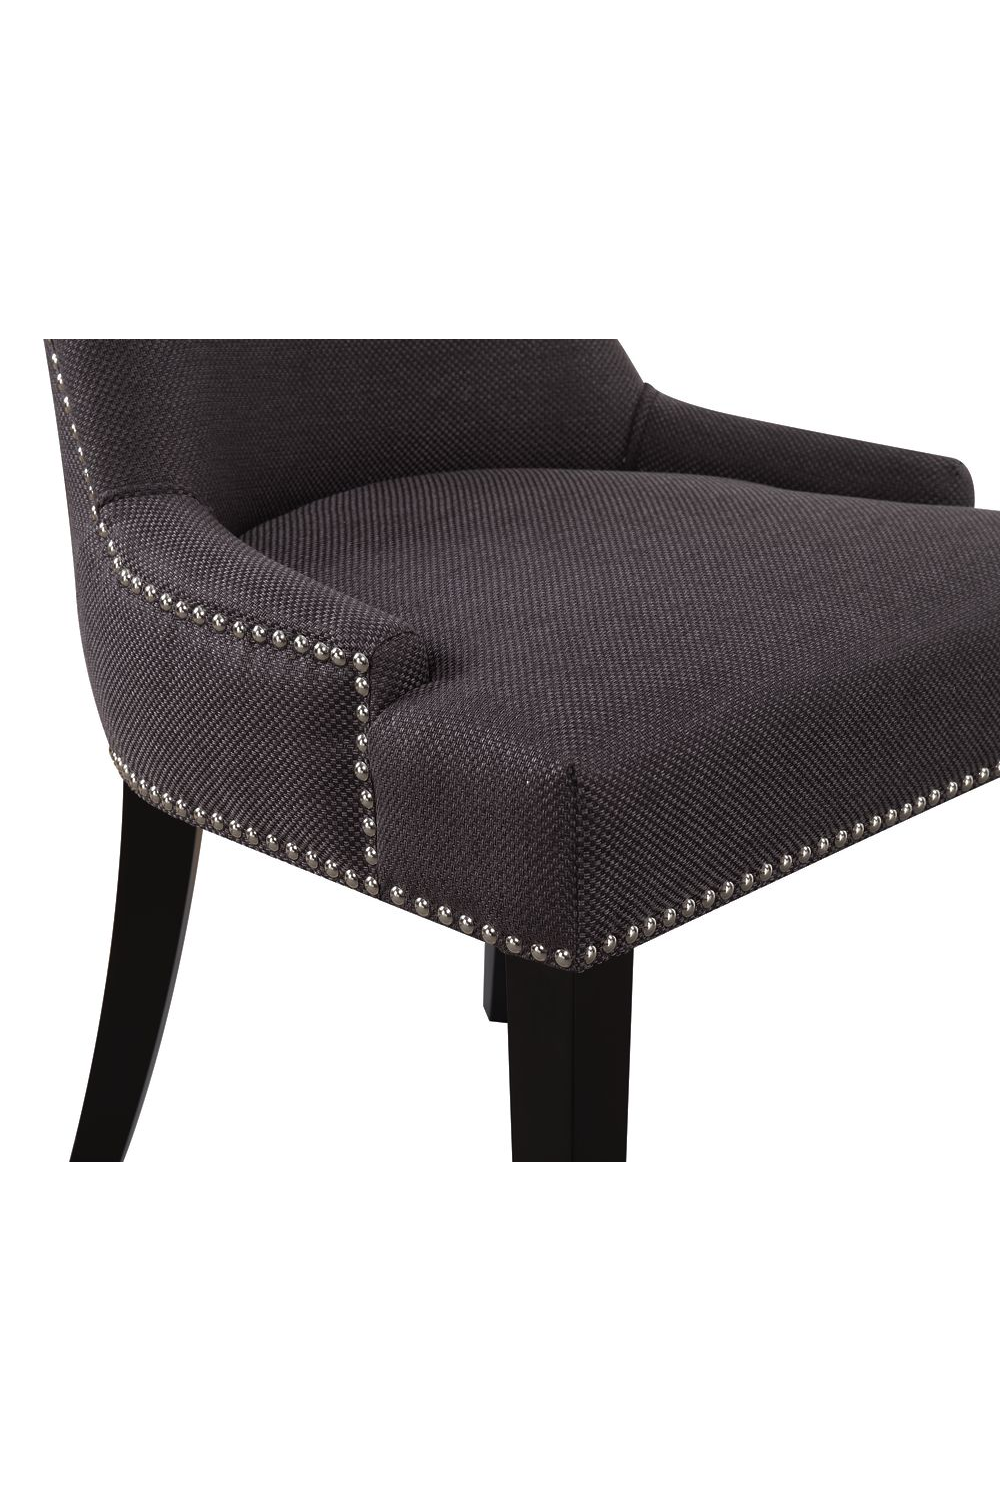 Black Scooped Back Dining Chair | Andrew Martin Theodore | OROA